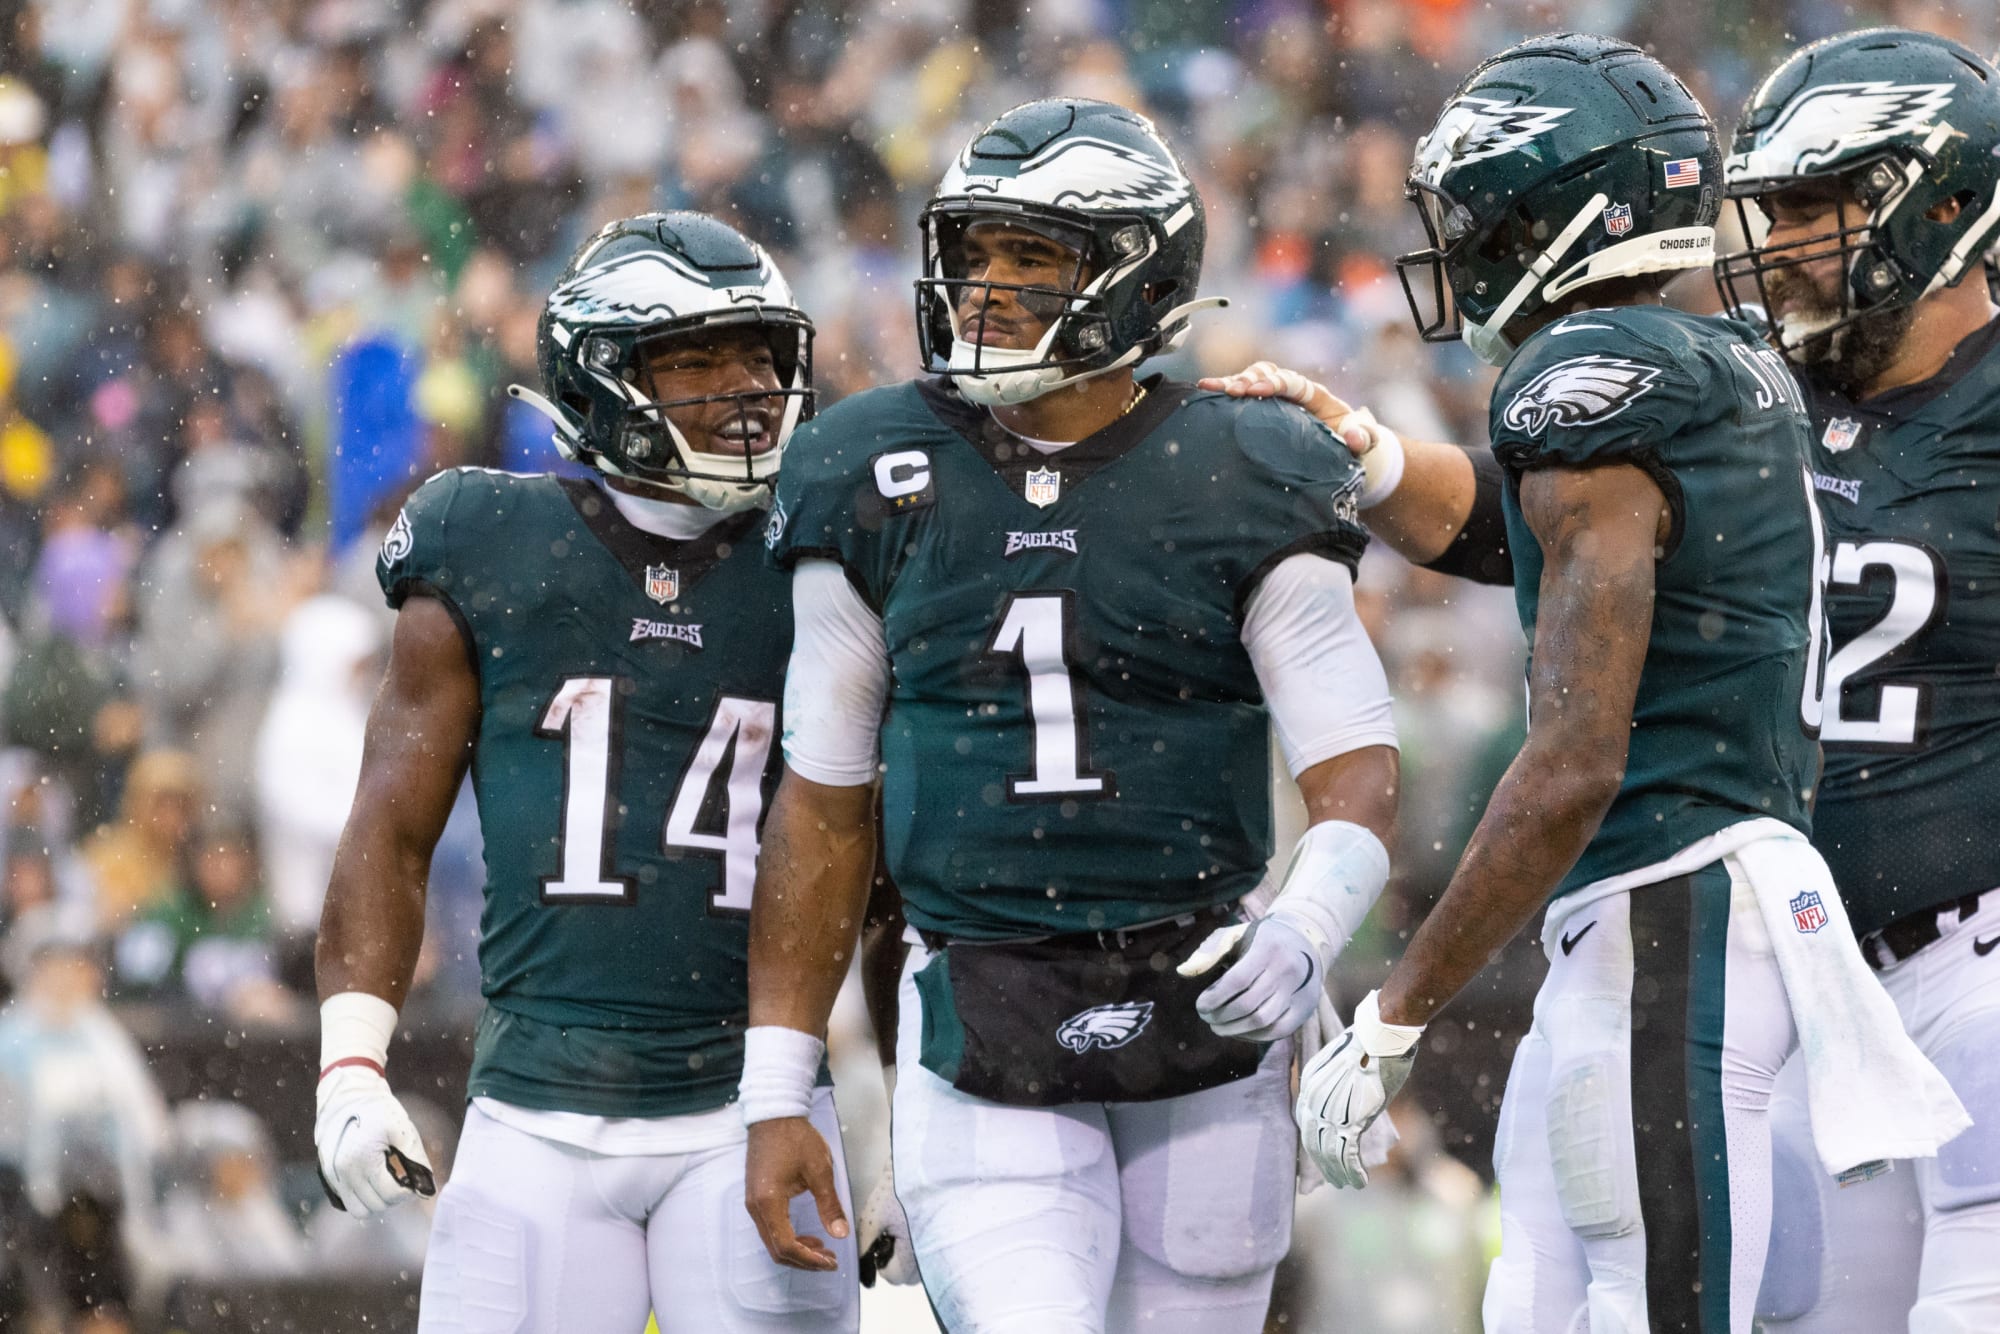 Remarkable Eagles stat plays major role in undefeated start